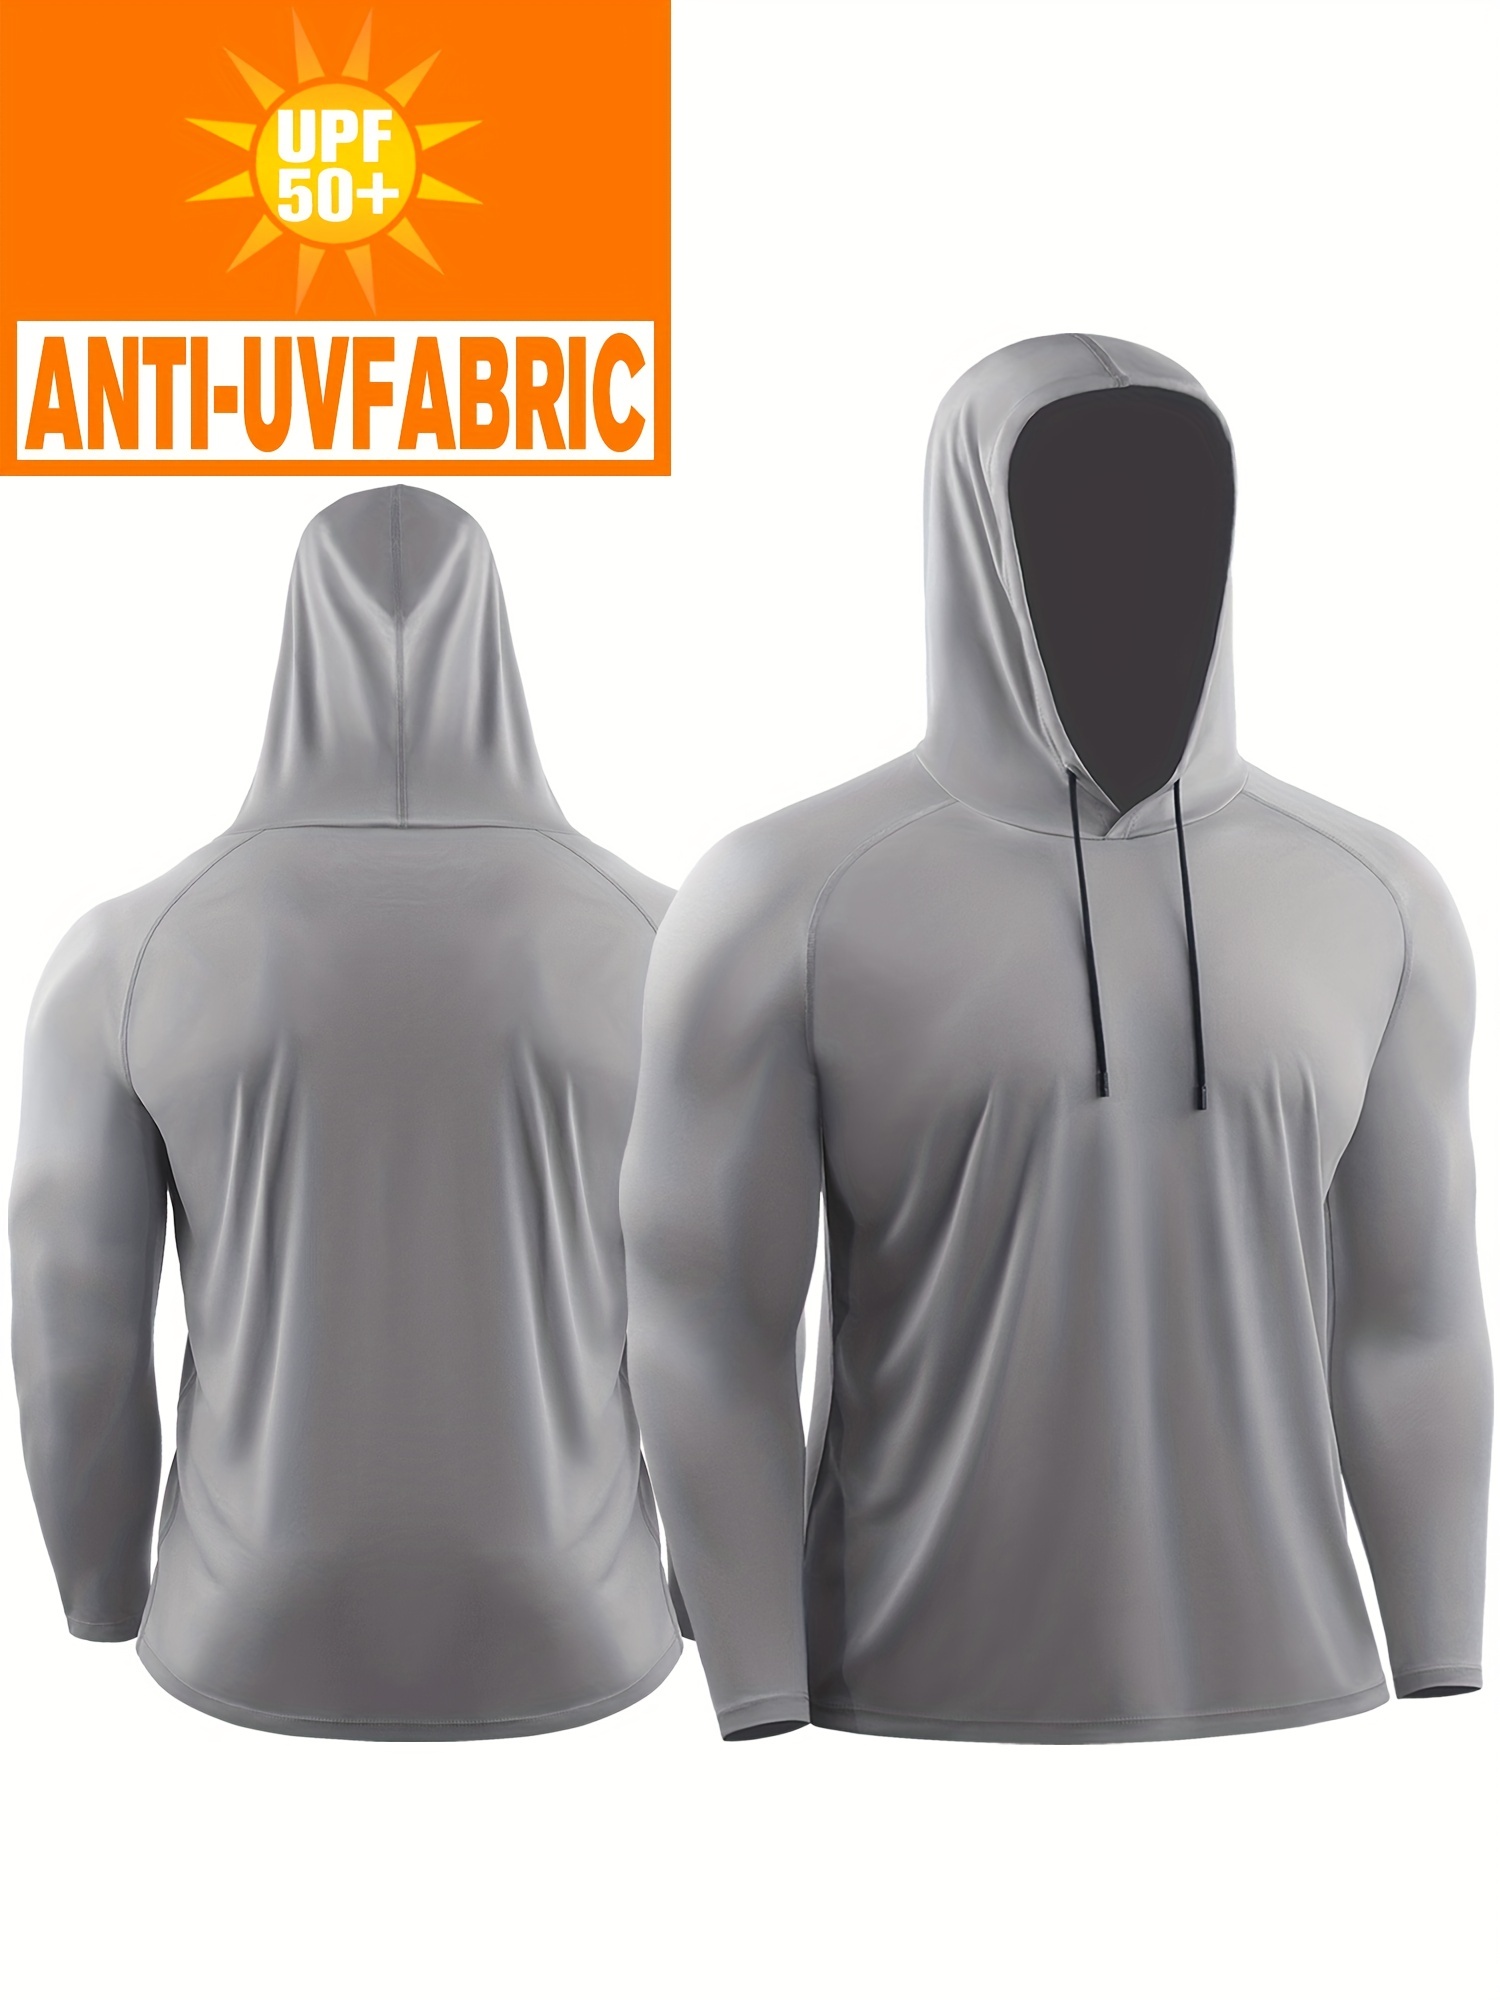 Sun Protection Clothing Men's Hoodies Running T-Shirts, Breathable